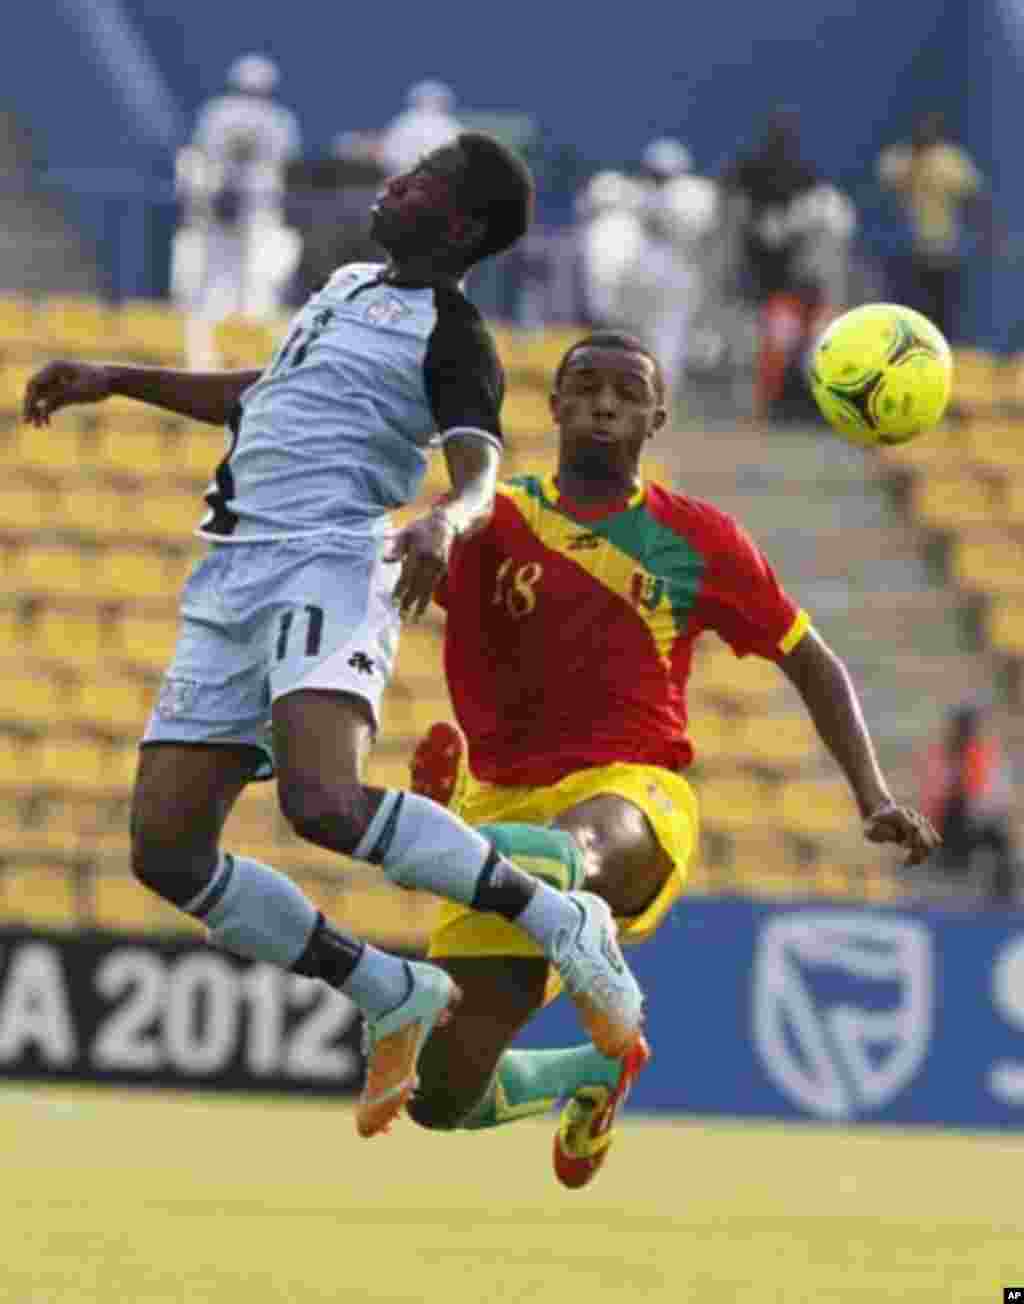 Guinea's Ibrahima Diallo (R) challenges Botswana's Dipsy Selolwane for the ball during their African Nations Cup Group D soccer match at Franceville Stadium January 28, 2012.